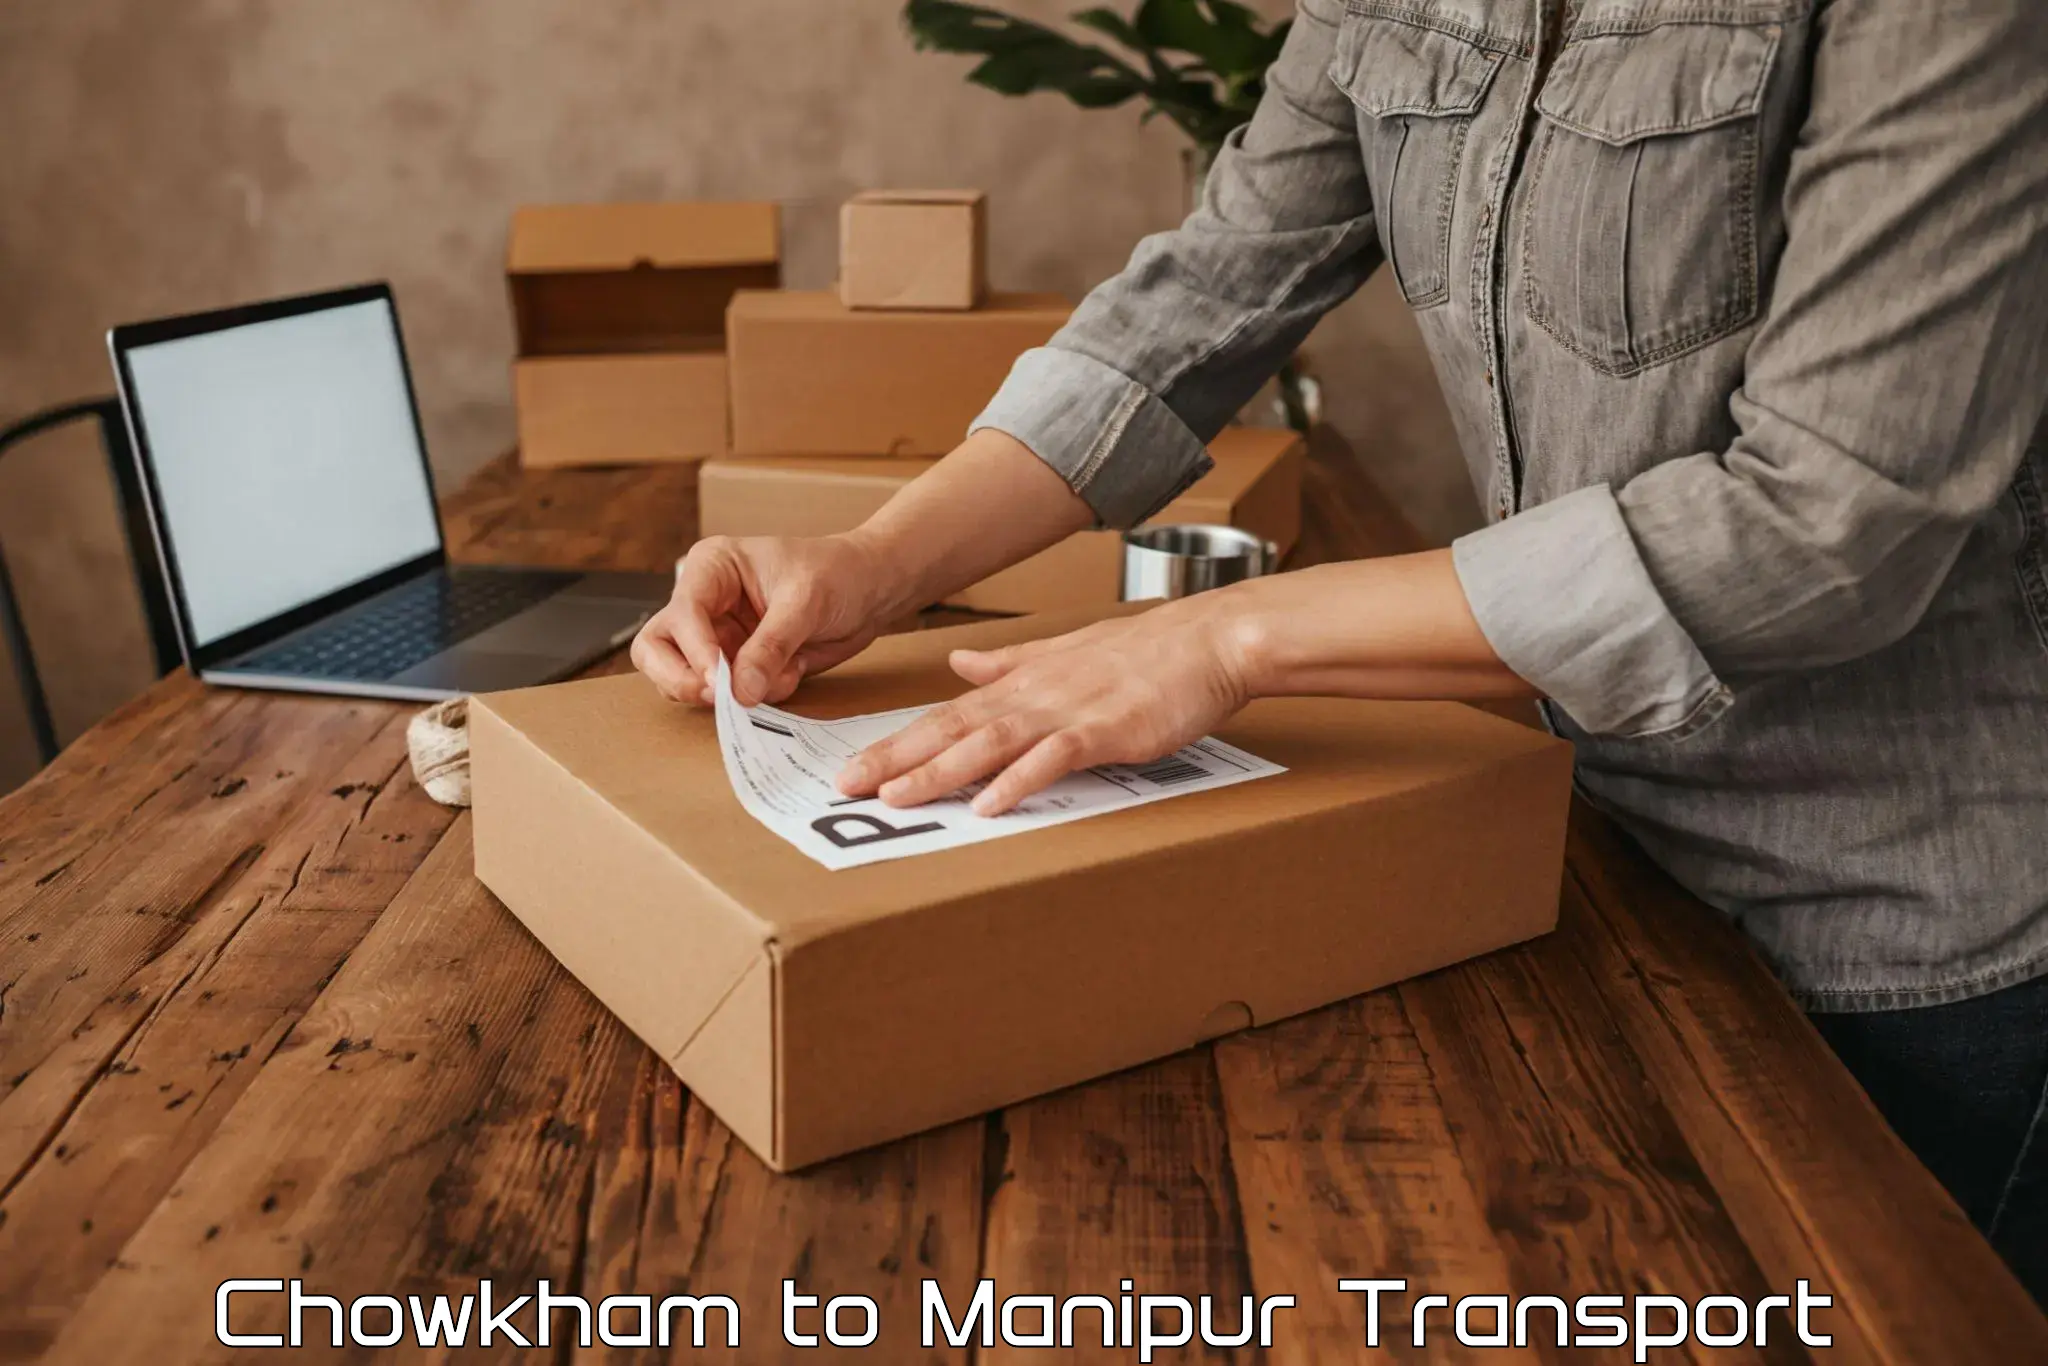 Vehicle transport services in Chowkham to Manipur